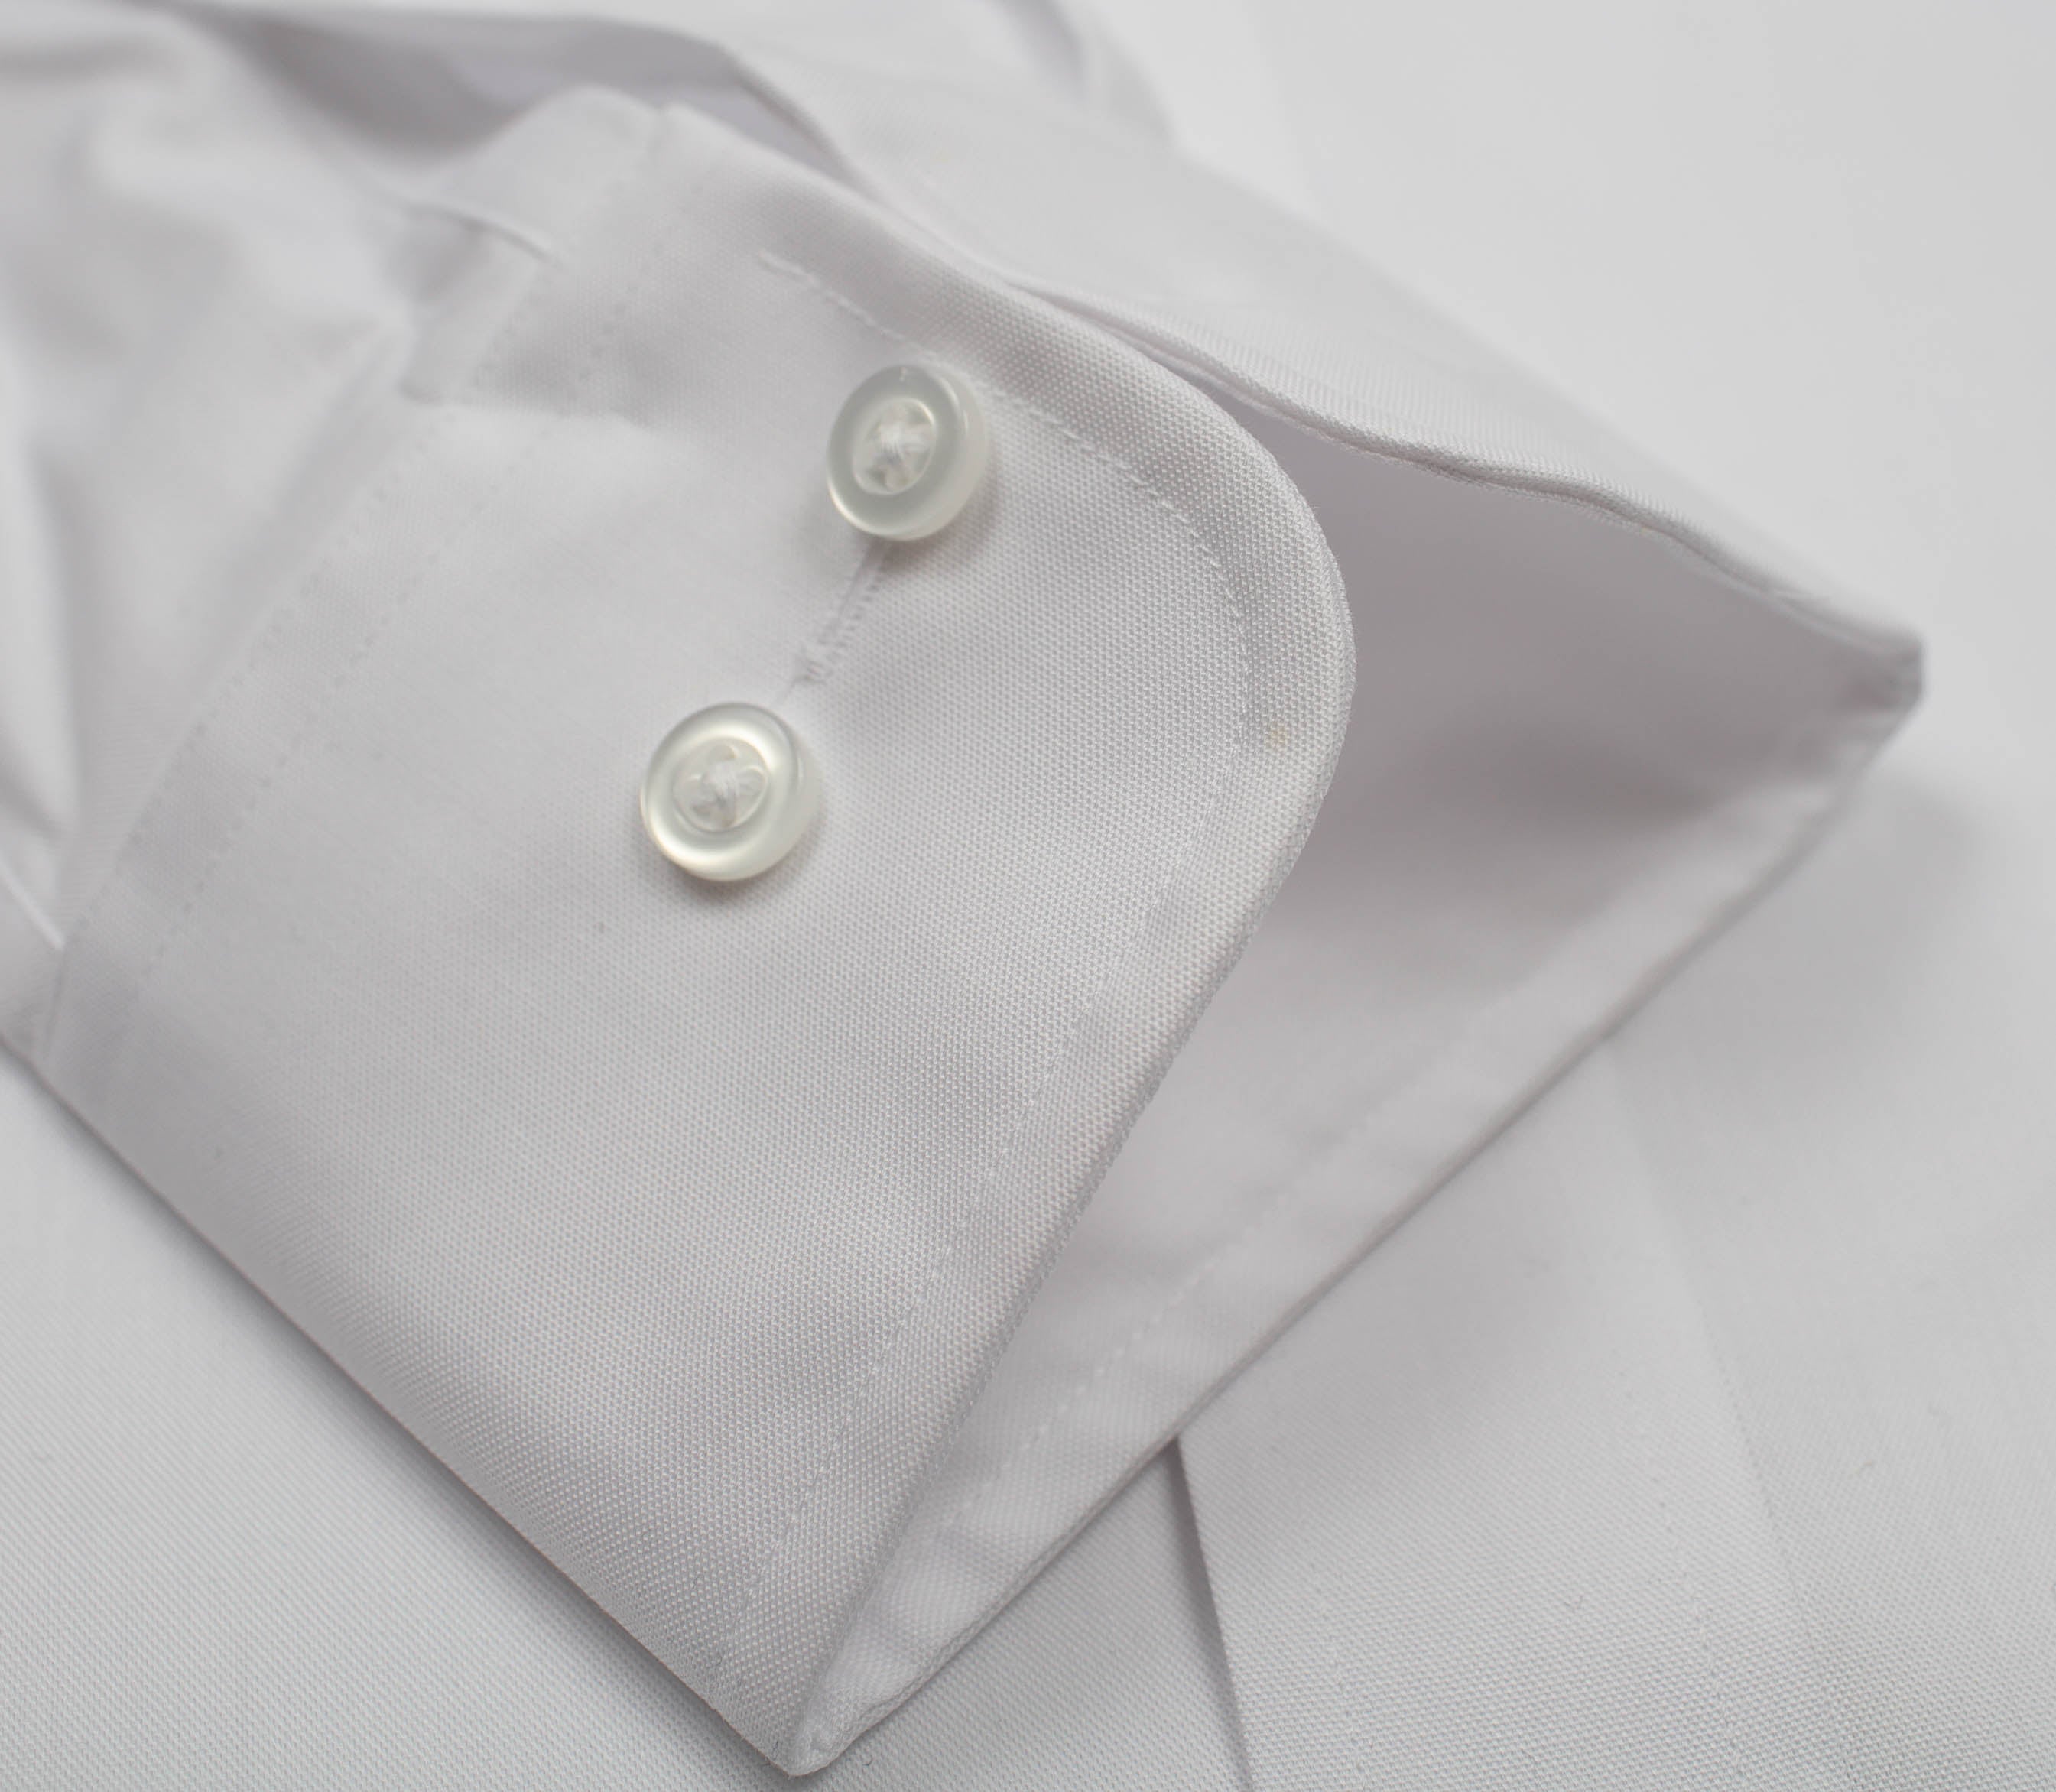 130 TF SC - Thomas Dylan White Tailored Fit Spread Collar